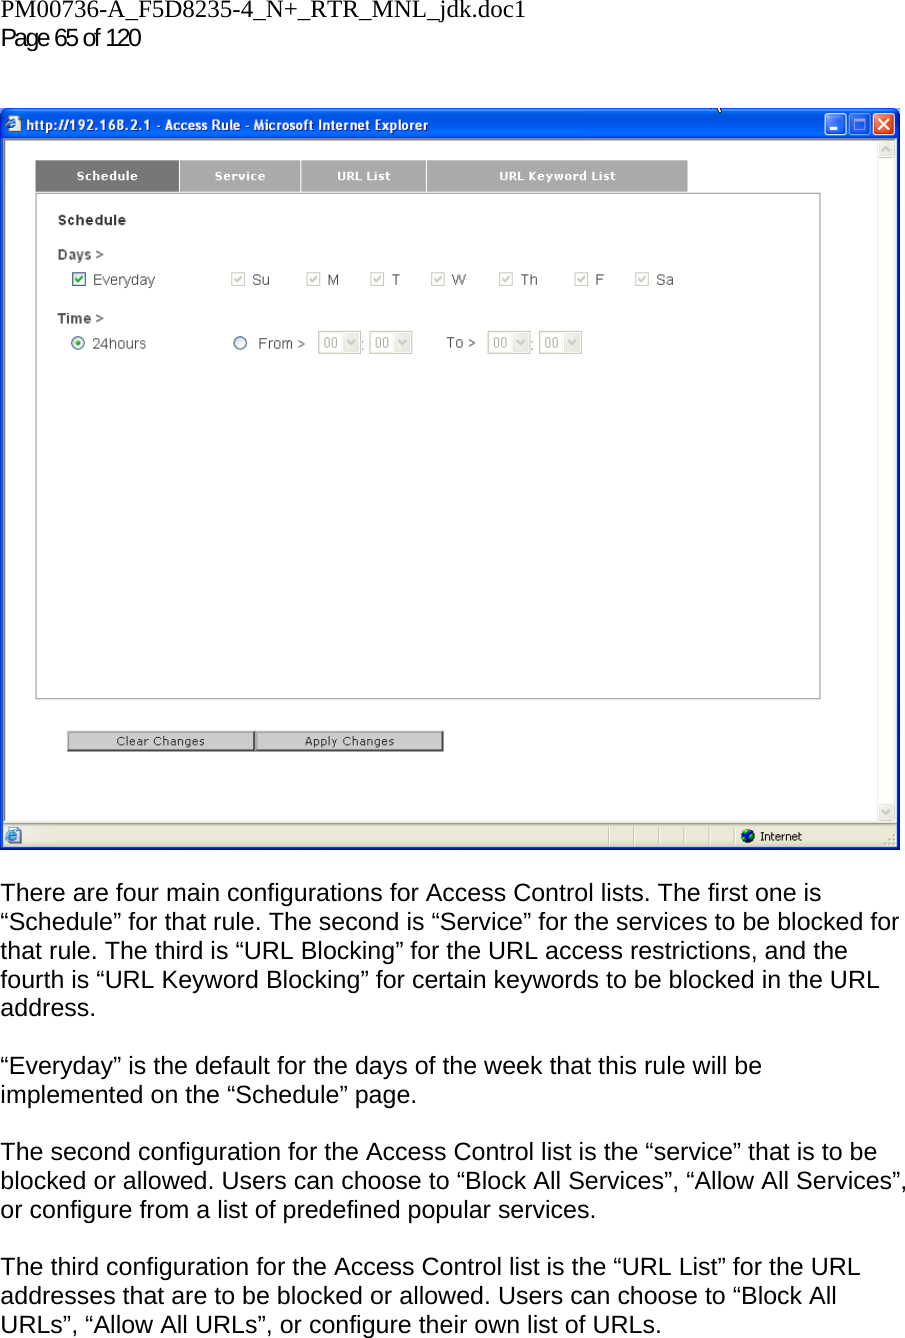 PM00736-A_F5D8235-4_N+_RTR_MNL_jdk.doc1  Page 65 of 120      There are four main configurations for Access Control lists. The first one is “Schedule” for that rule. The second is “Service” for the services to be blocked for that rule. The third is “URL Blocking” for the URL access restrictions, and the fourth is “URL Keyword Blocking” for certain keywords to be blocked in the URL address.  “Everyday” is the default for the days of the week that this rule will be implemented on the “Schedule” page.  The second configuration for the Access Control list is the “service” that is to be blocked or allowed. Users can choose to “Block All Services”, “Allow All Services”, or configure from a list of predefined popular services.  The third configuration for the Access Control list is the “URL List” for the URL addresses that are to be blocked or allowed. Users can choose to “Block All URLs”, “Allow All URLs”, or configure their own list of URLs.  